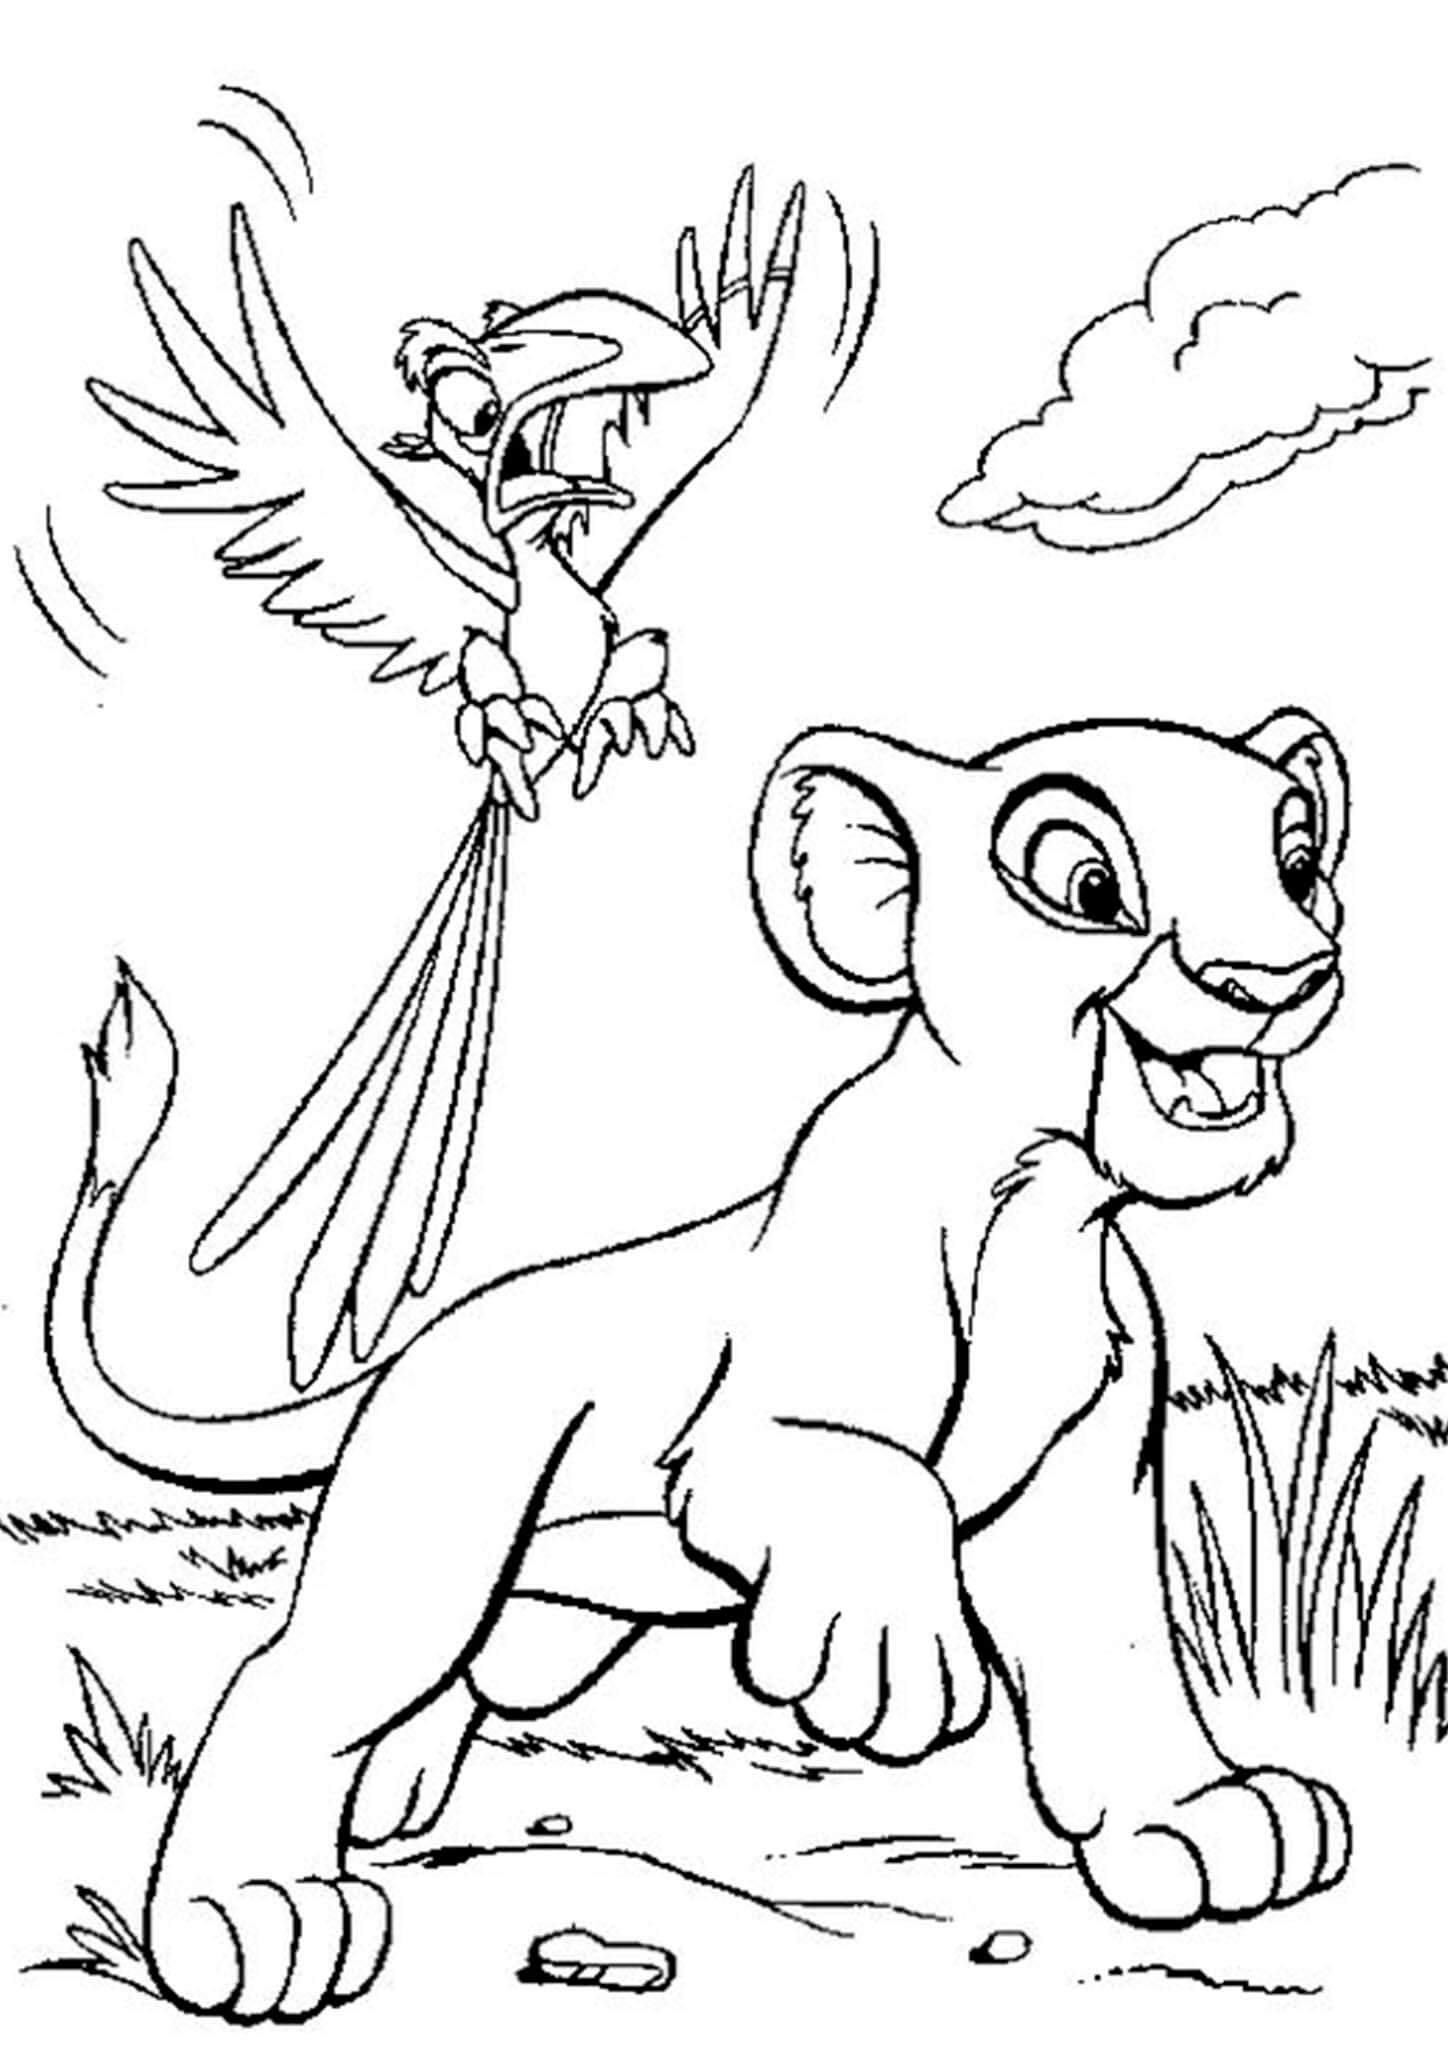 Printable Lion King Coloring Pages